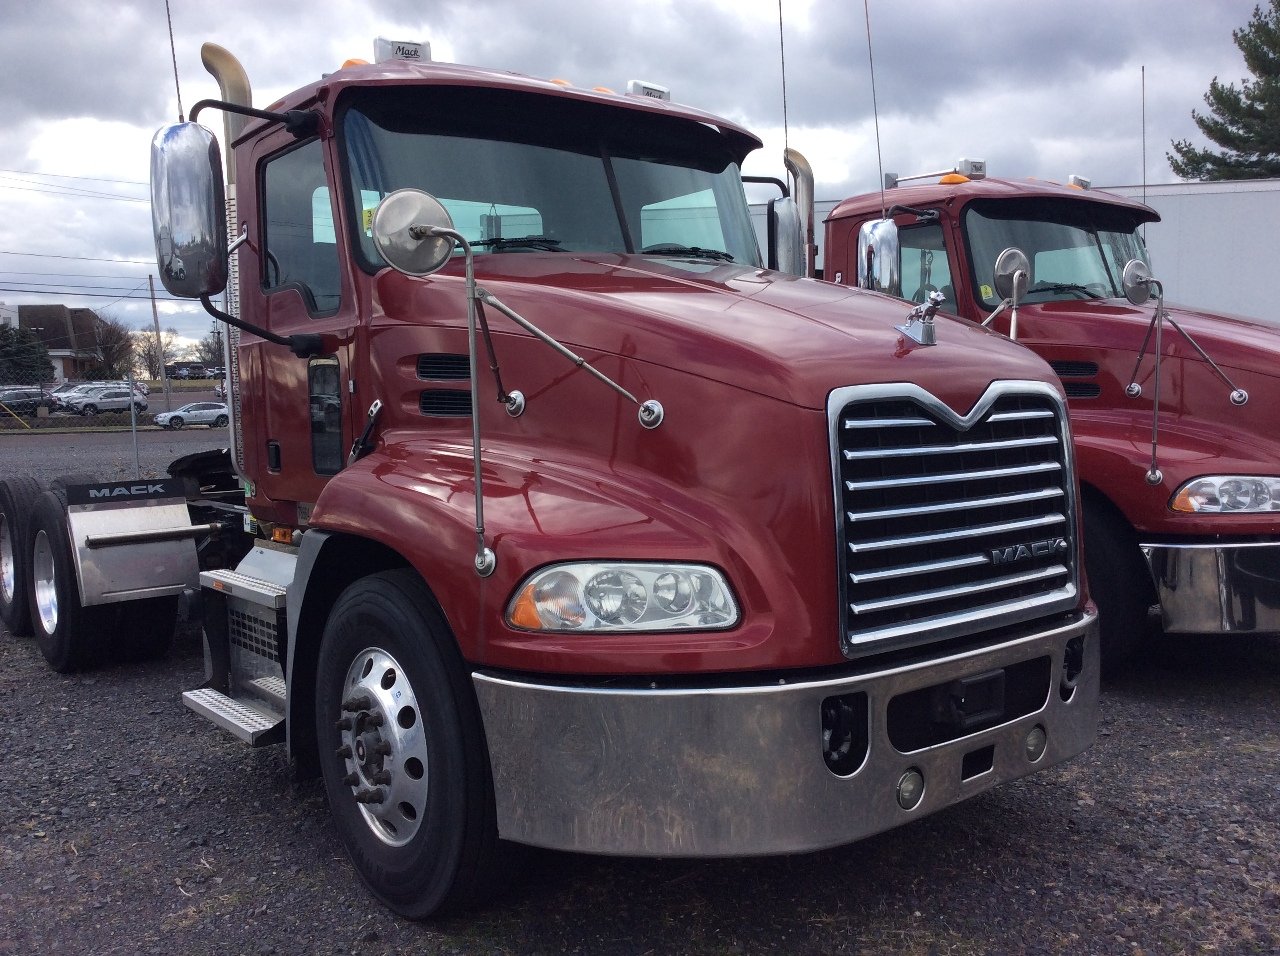 Used Truck Inventory - 1001883 02 2 - 83